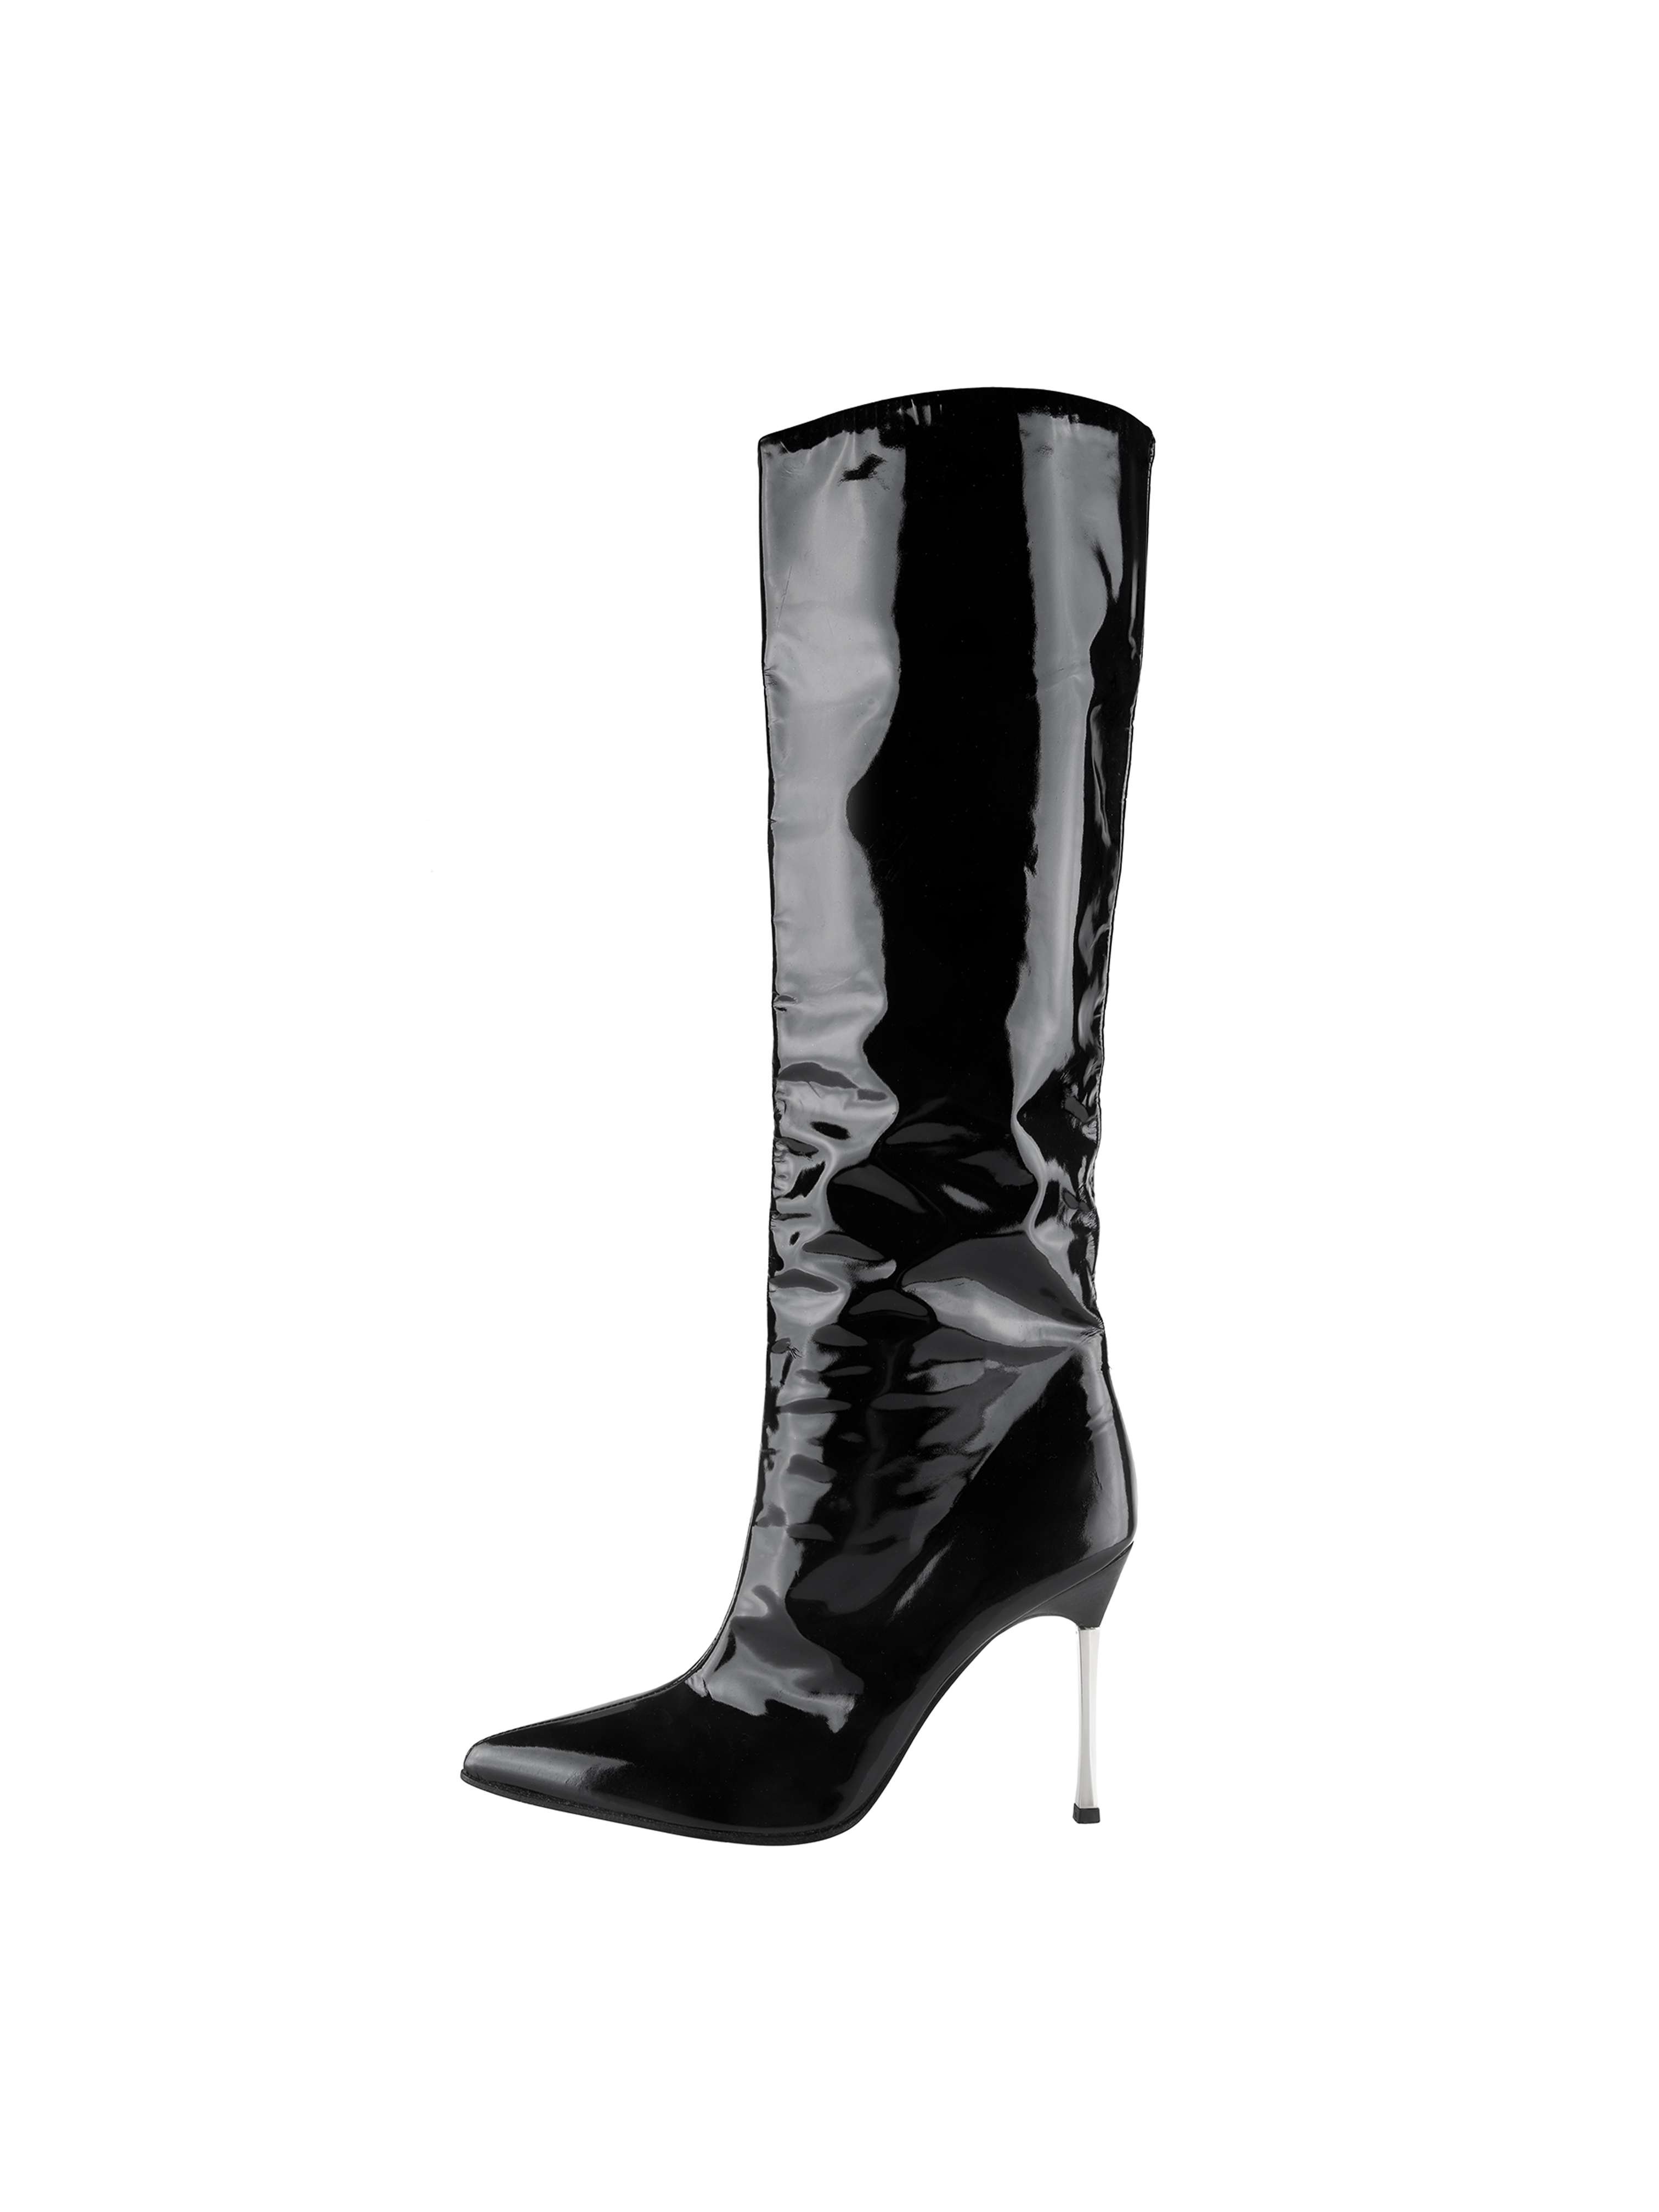 Gucci by Tom Ford Fall-Winter 1997 Black Patent Leather Boots